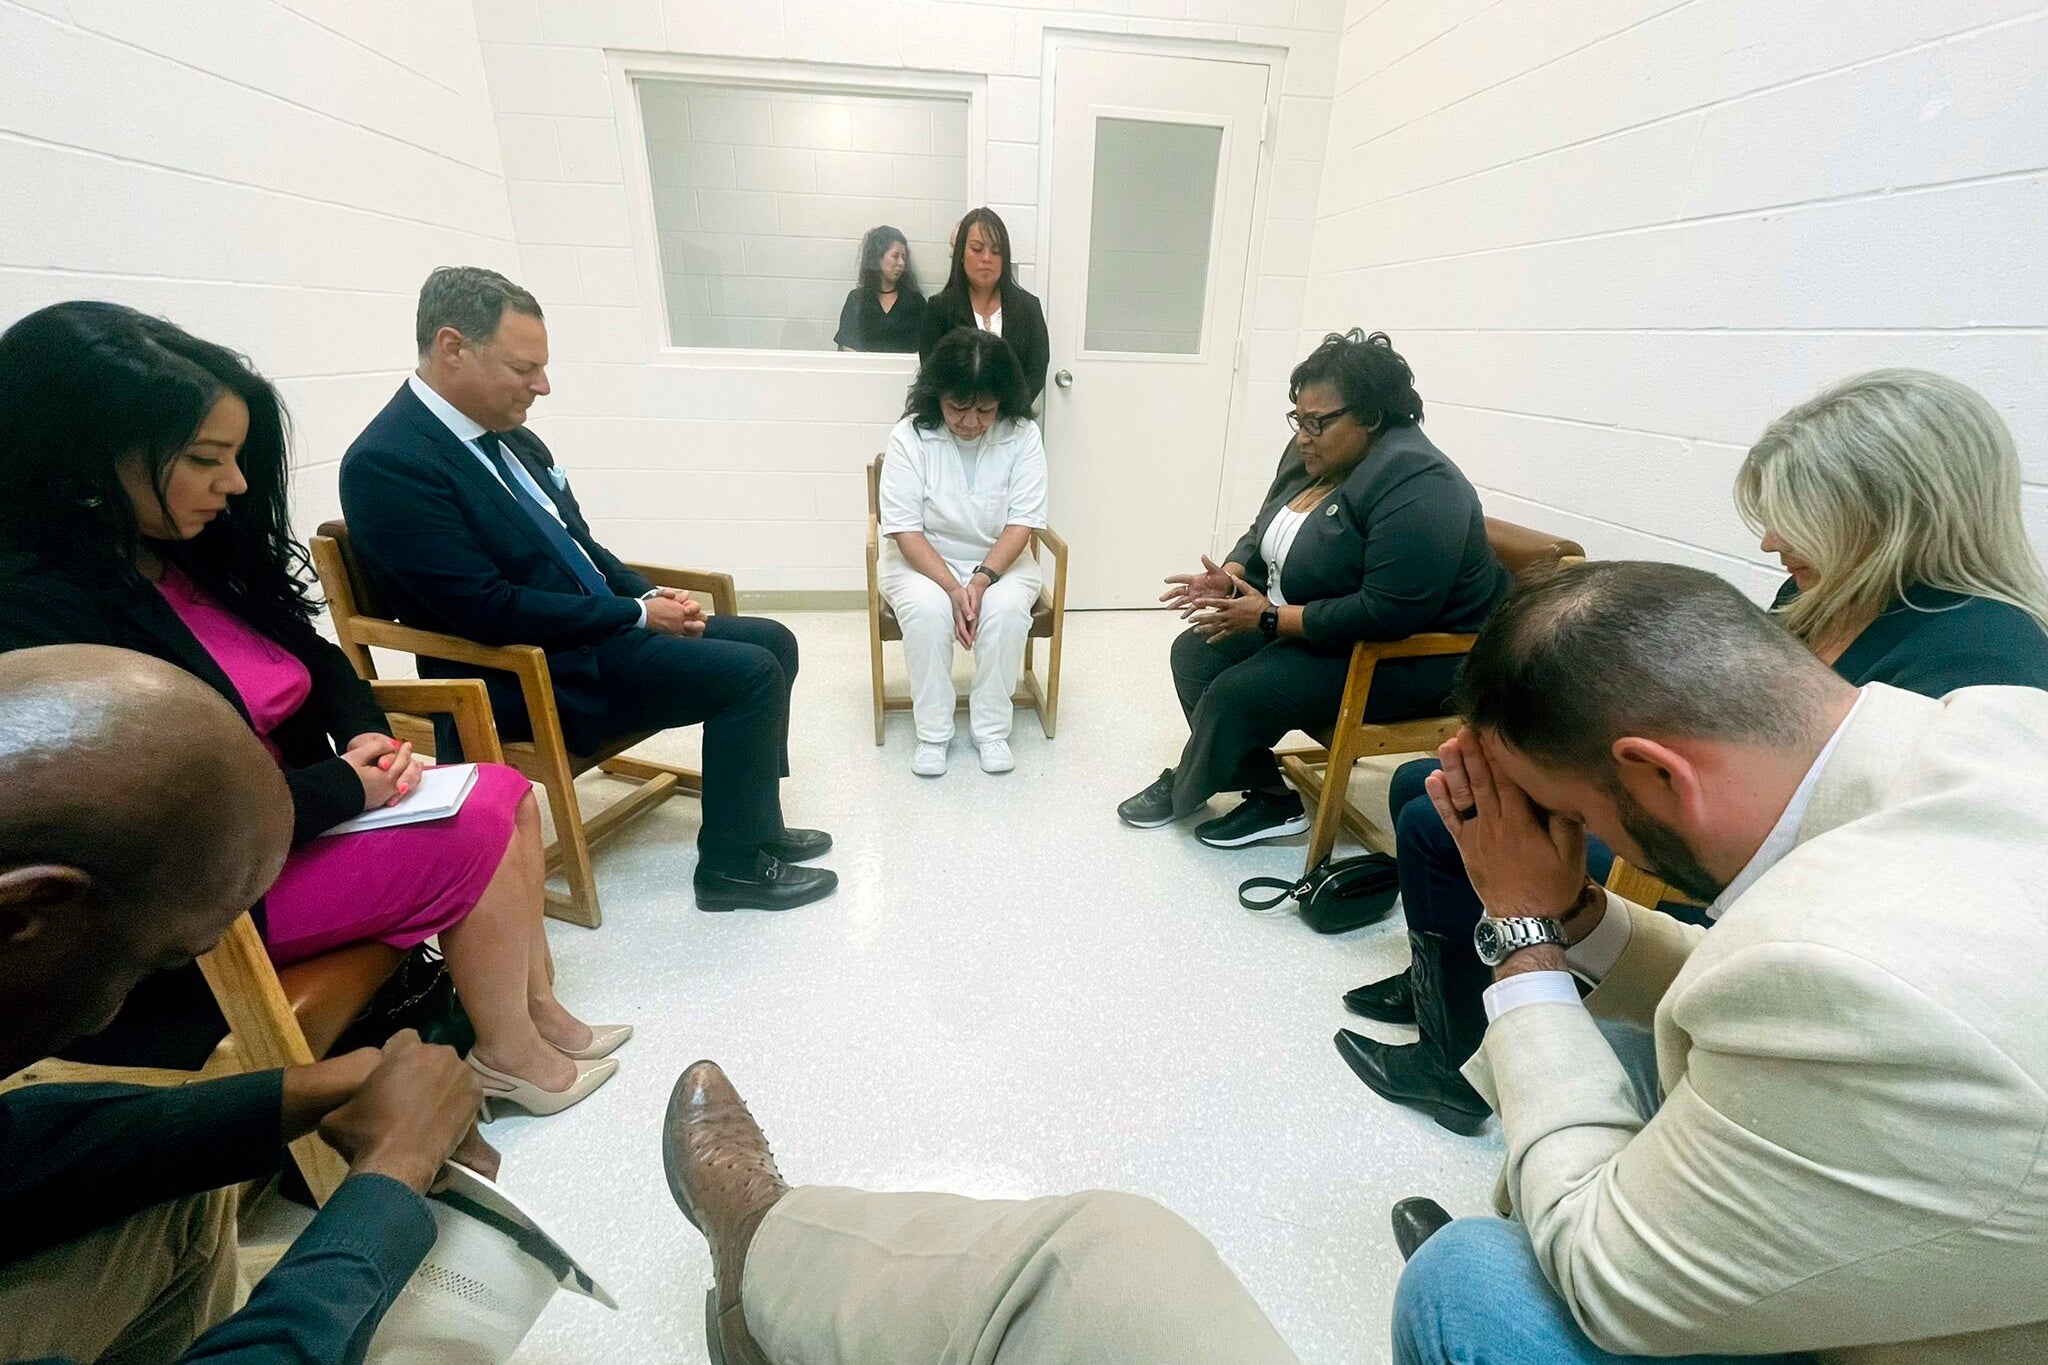 In this April 6, 2022 photo provided by Texas state Rep. Jeff Leach, Texas death row inmate Melissa Lucio, dressed in white, leads a group of seven Texas lawmakers in prayer in a room at the Mountain View Unit in Gatesville, Texas